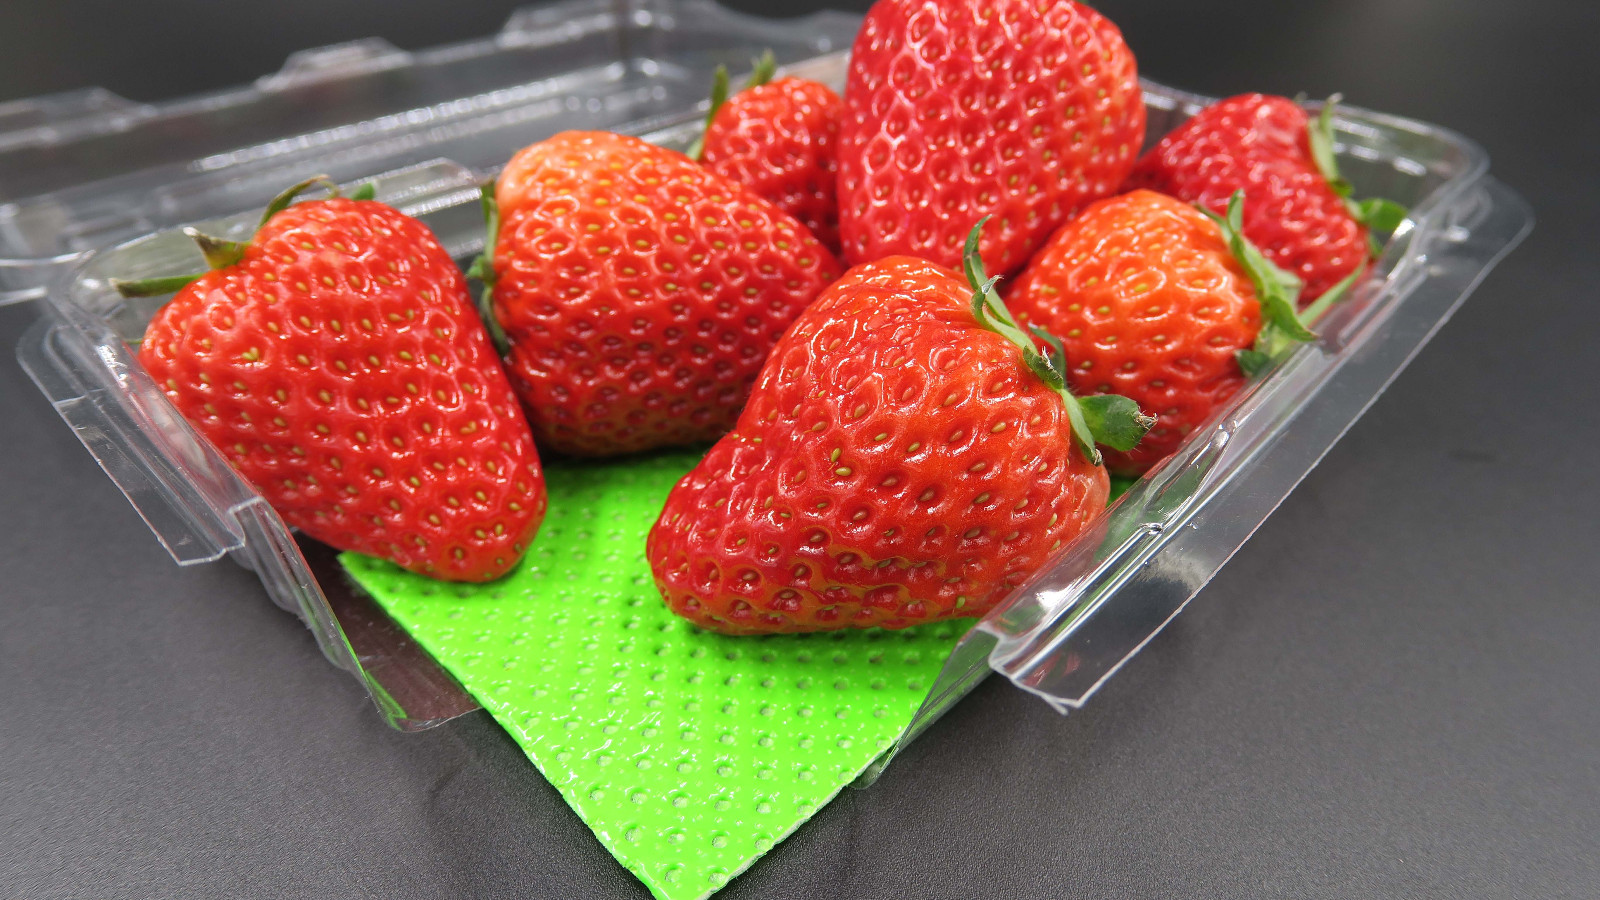 Demi exceptional universal absorbent pads maintaining great product presentation for fruit-7